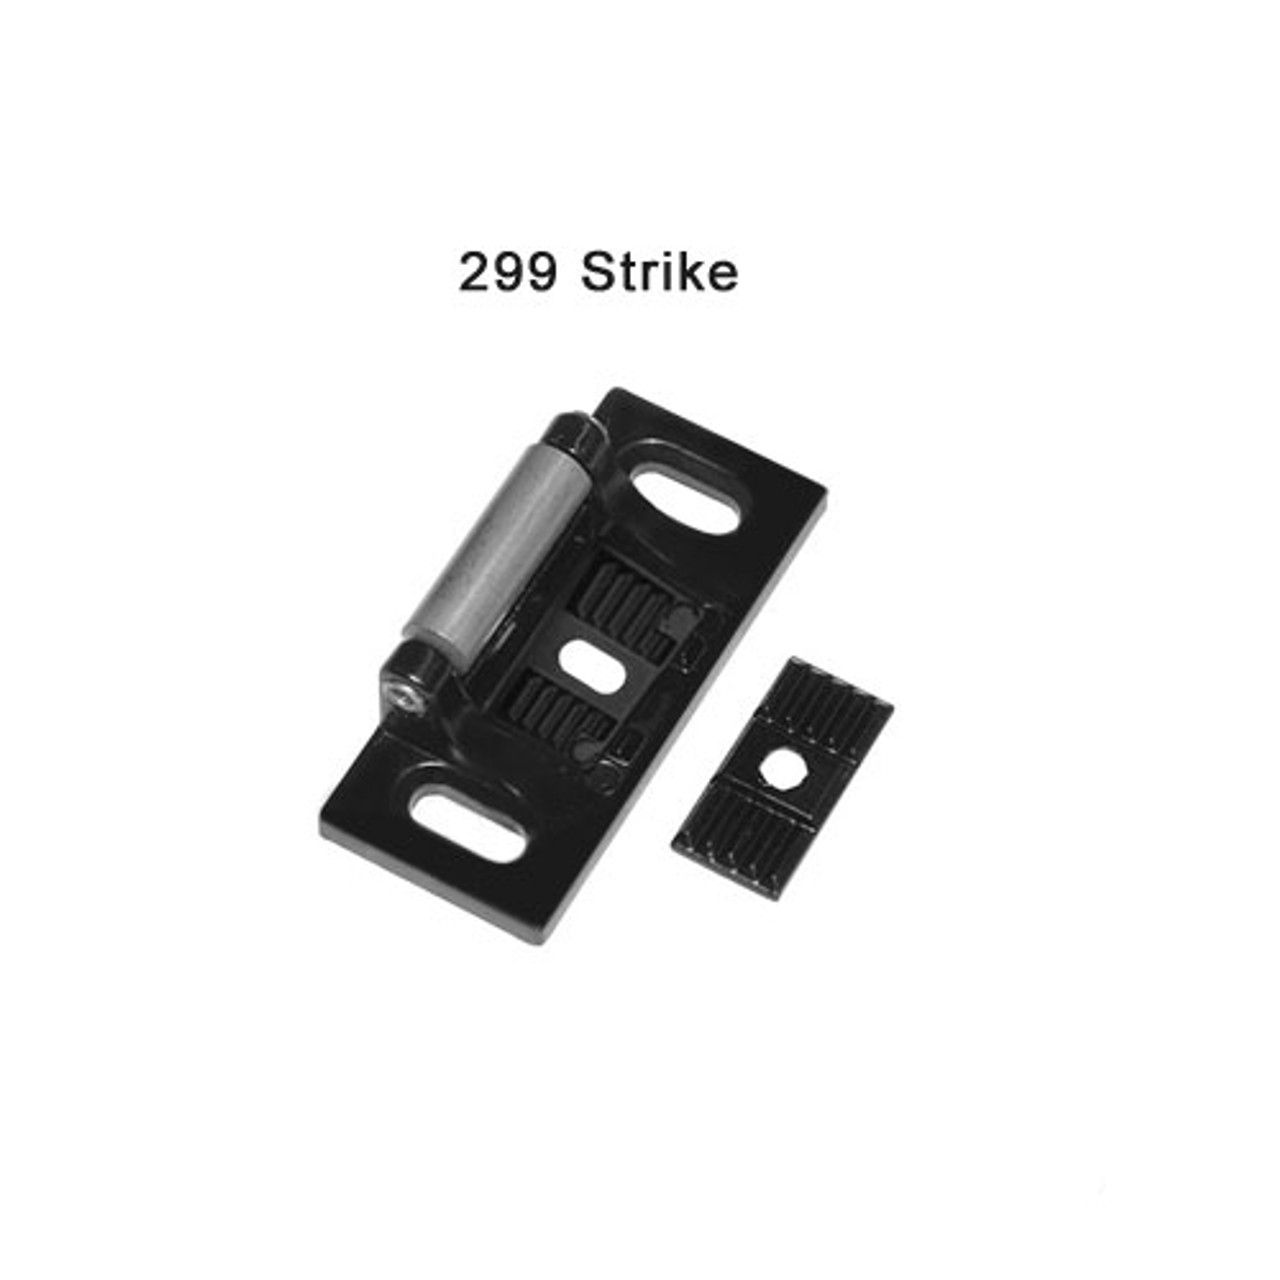 CD25-R-NL-US19-3 Falcon 25 Series Rim Exit Device with 512NL Night Latch Trim in Flat Black Painted